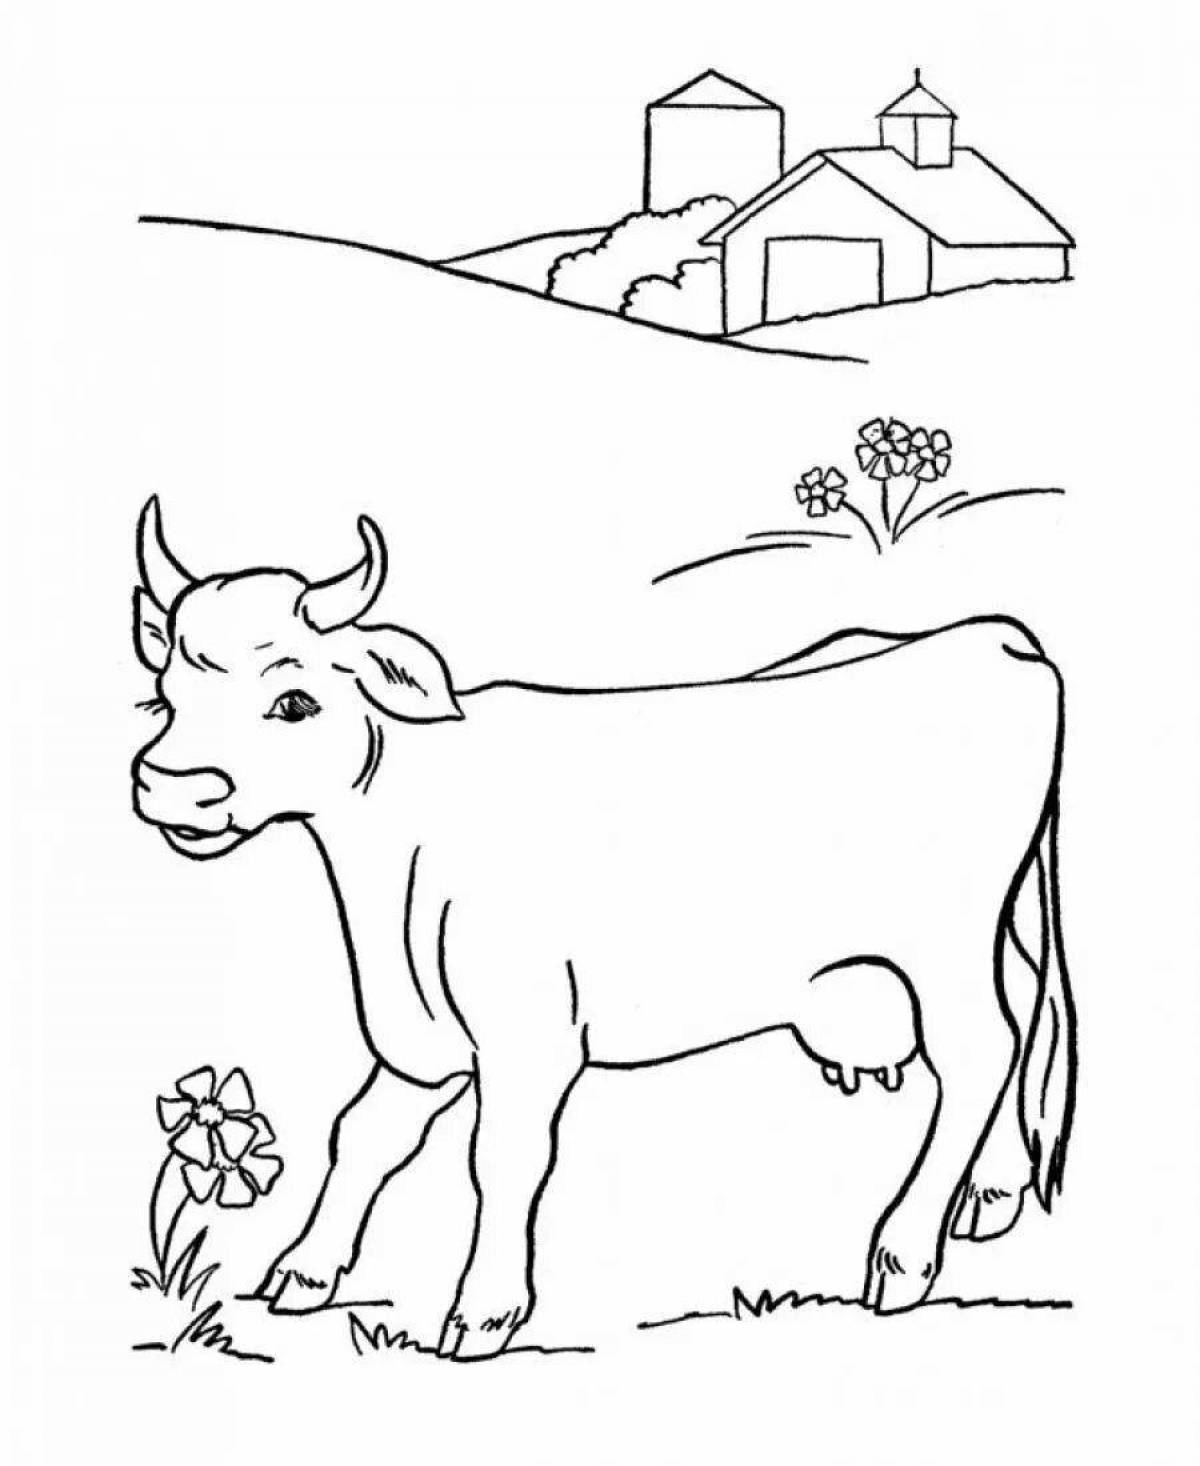 Colorful pet coloring page